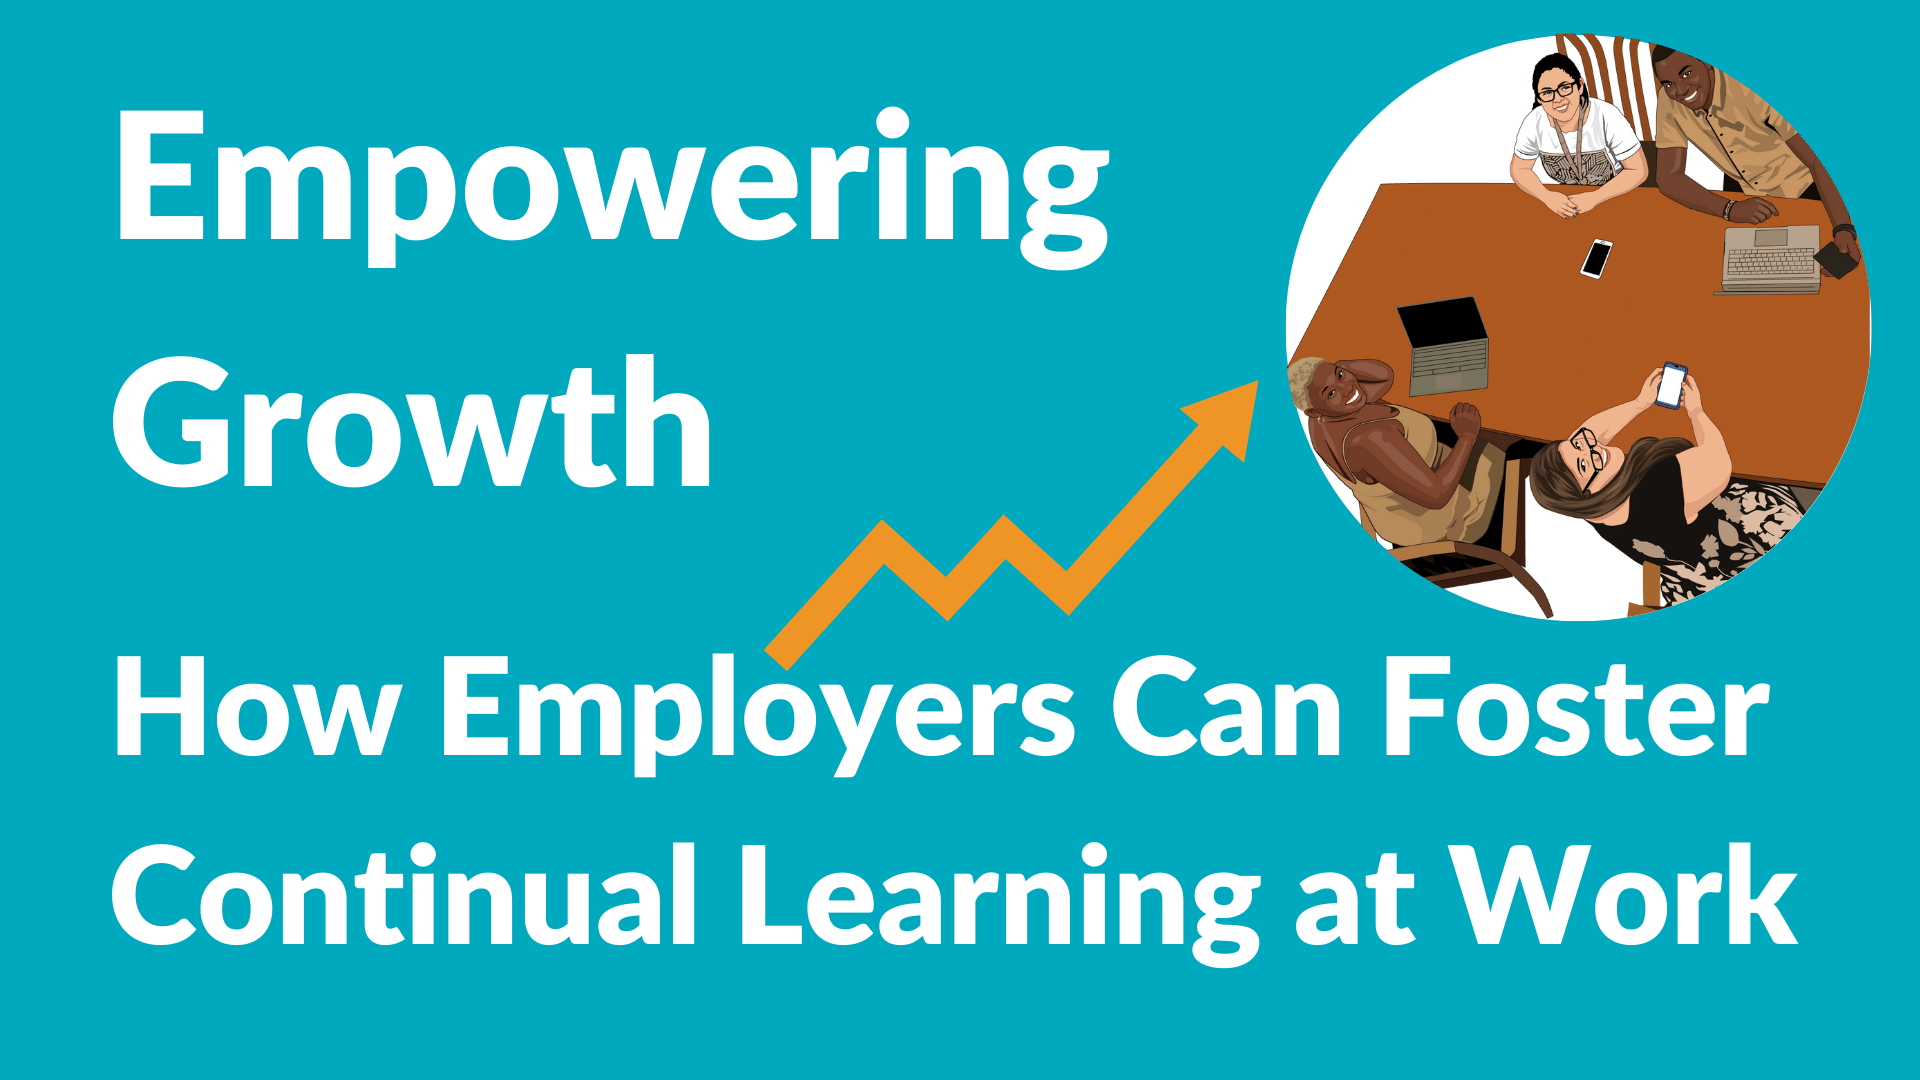 Empowering Growth: How Employers Can Foster Continual Learning at Work